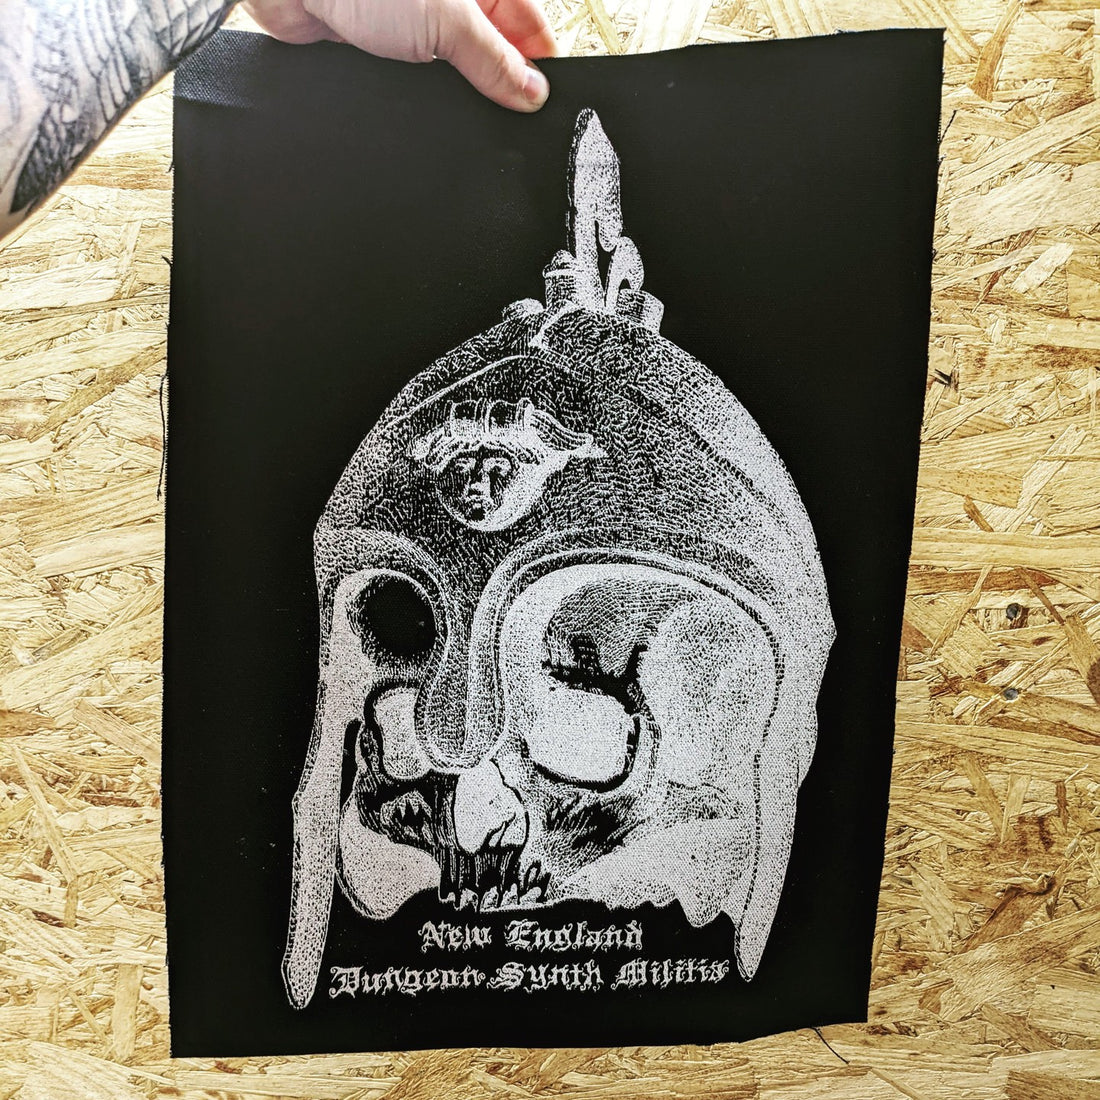 NEDSM back patches, silkscreen edition of 18